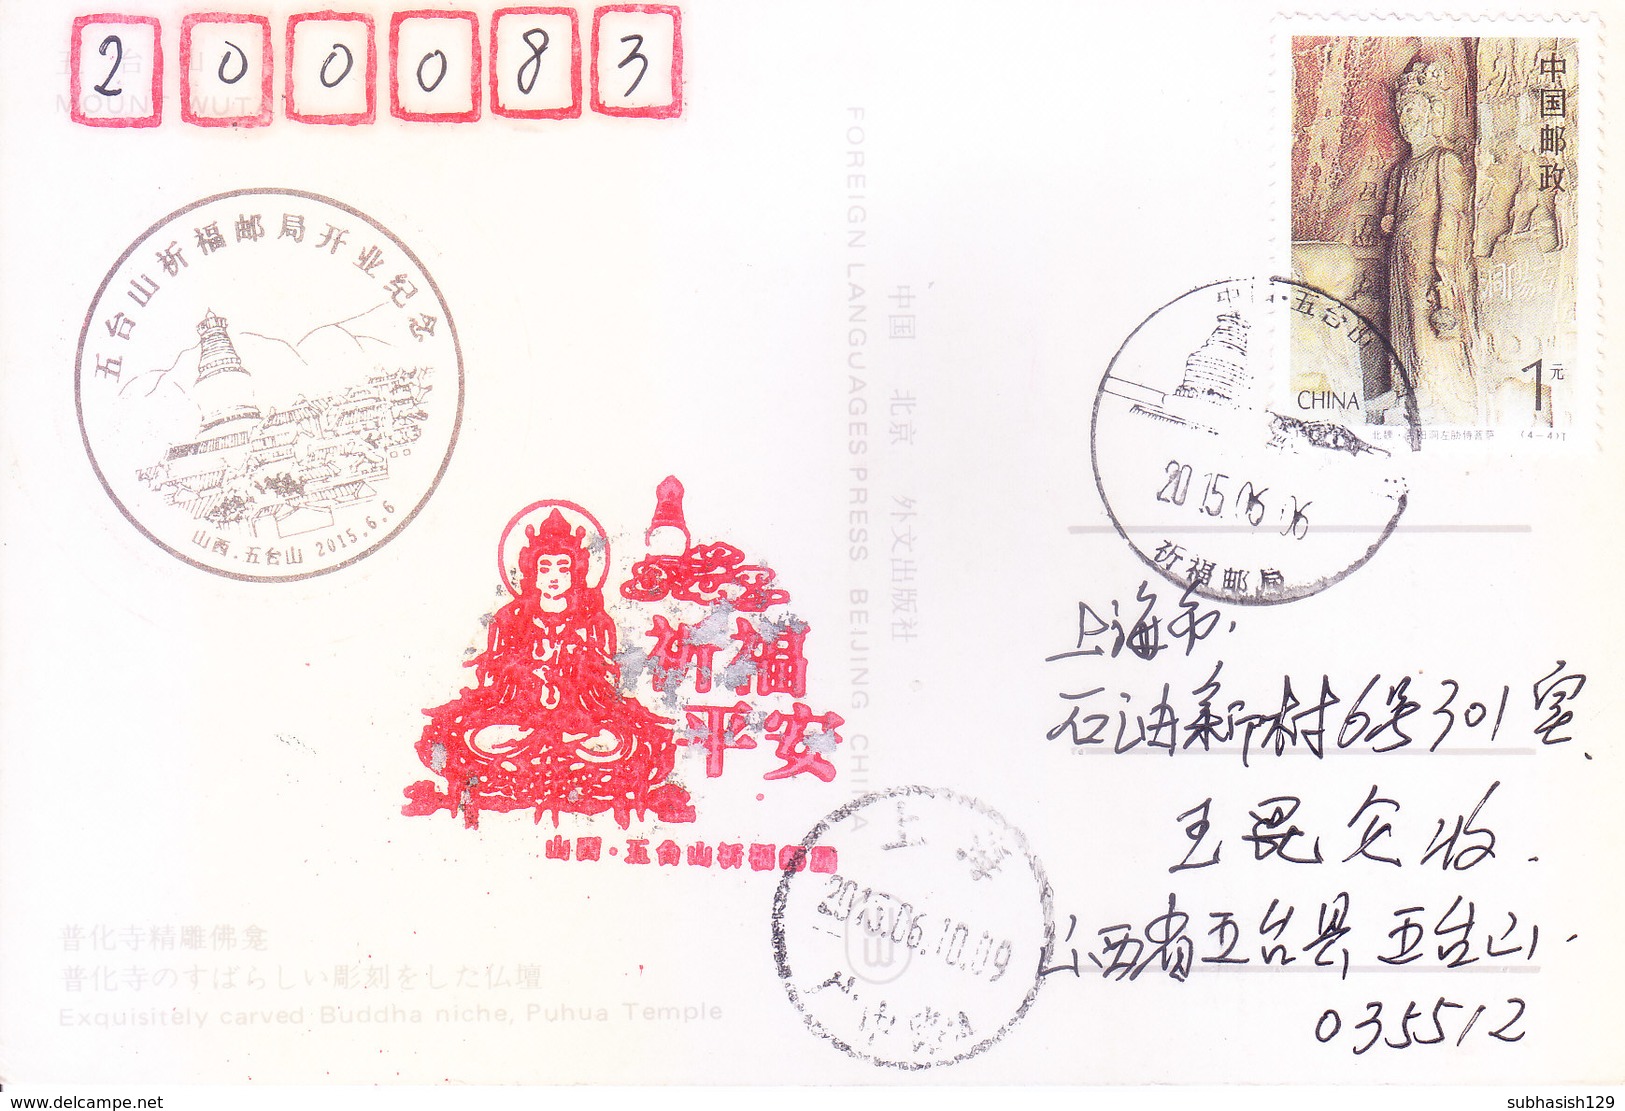 CHINA 2015 COMMERCIALLY USED PICTURE POST CARD ON BUDDHISM WITH SPECIAL PICTORIAL CANCELLATION AND SPECIAL SEAL - Covers & Documents